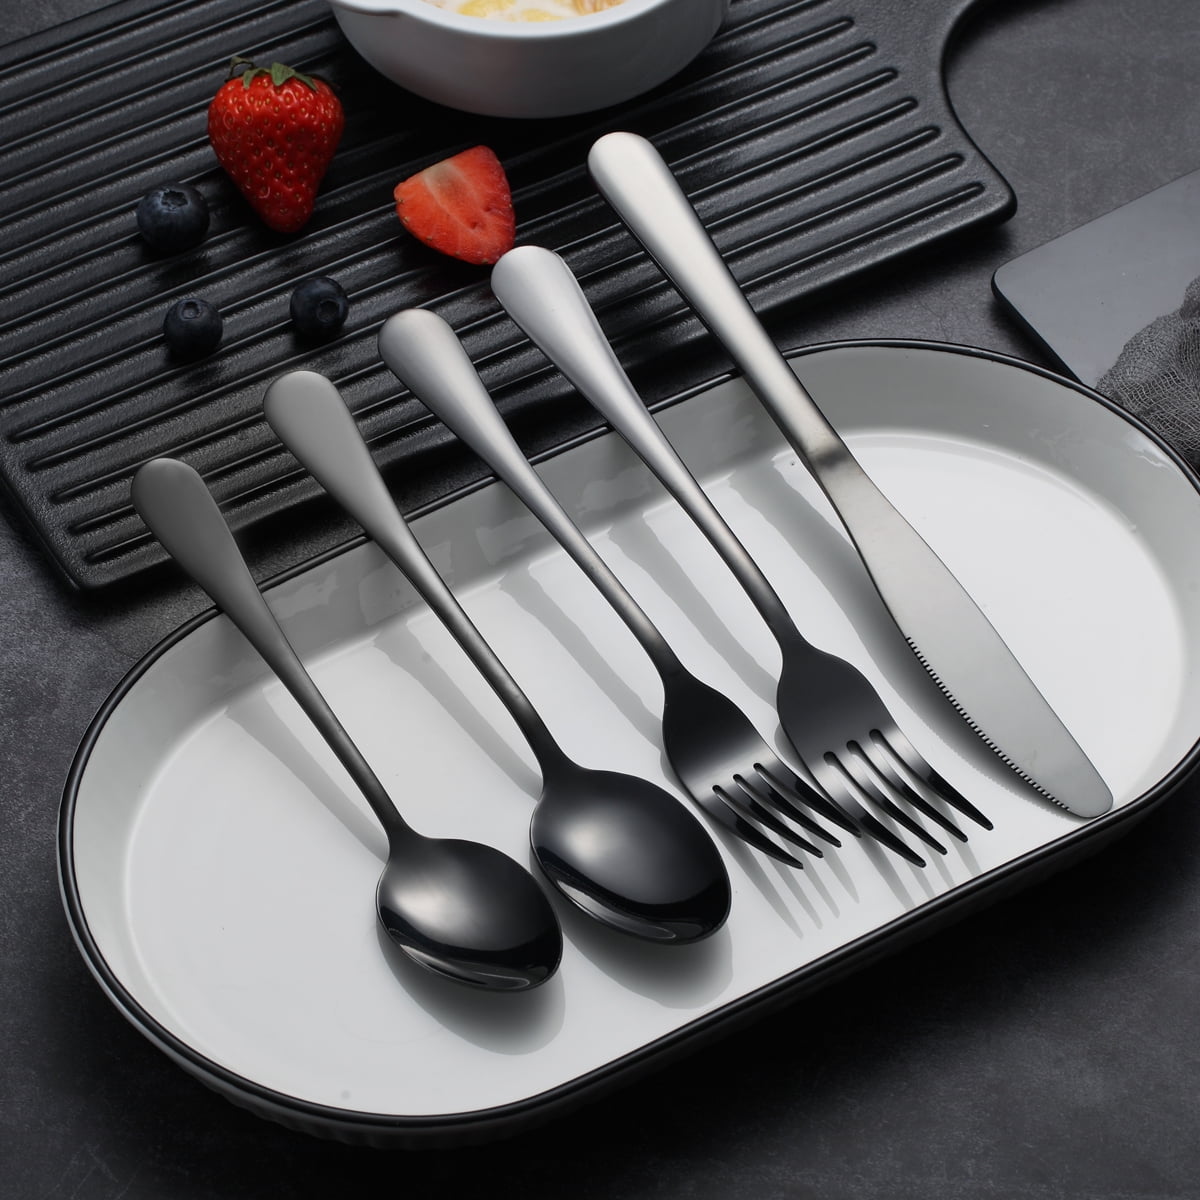 Reanea Silverware Set 40 Pieces, Stainless Steel Flatware Set Cutlery Set Utensil Sets Service for 8, Size: 9.45 x 3.54 x 1.97